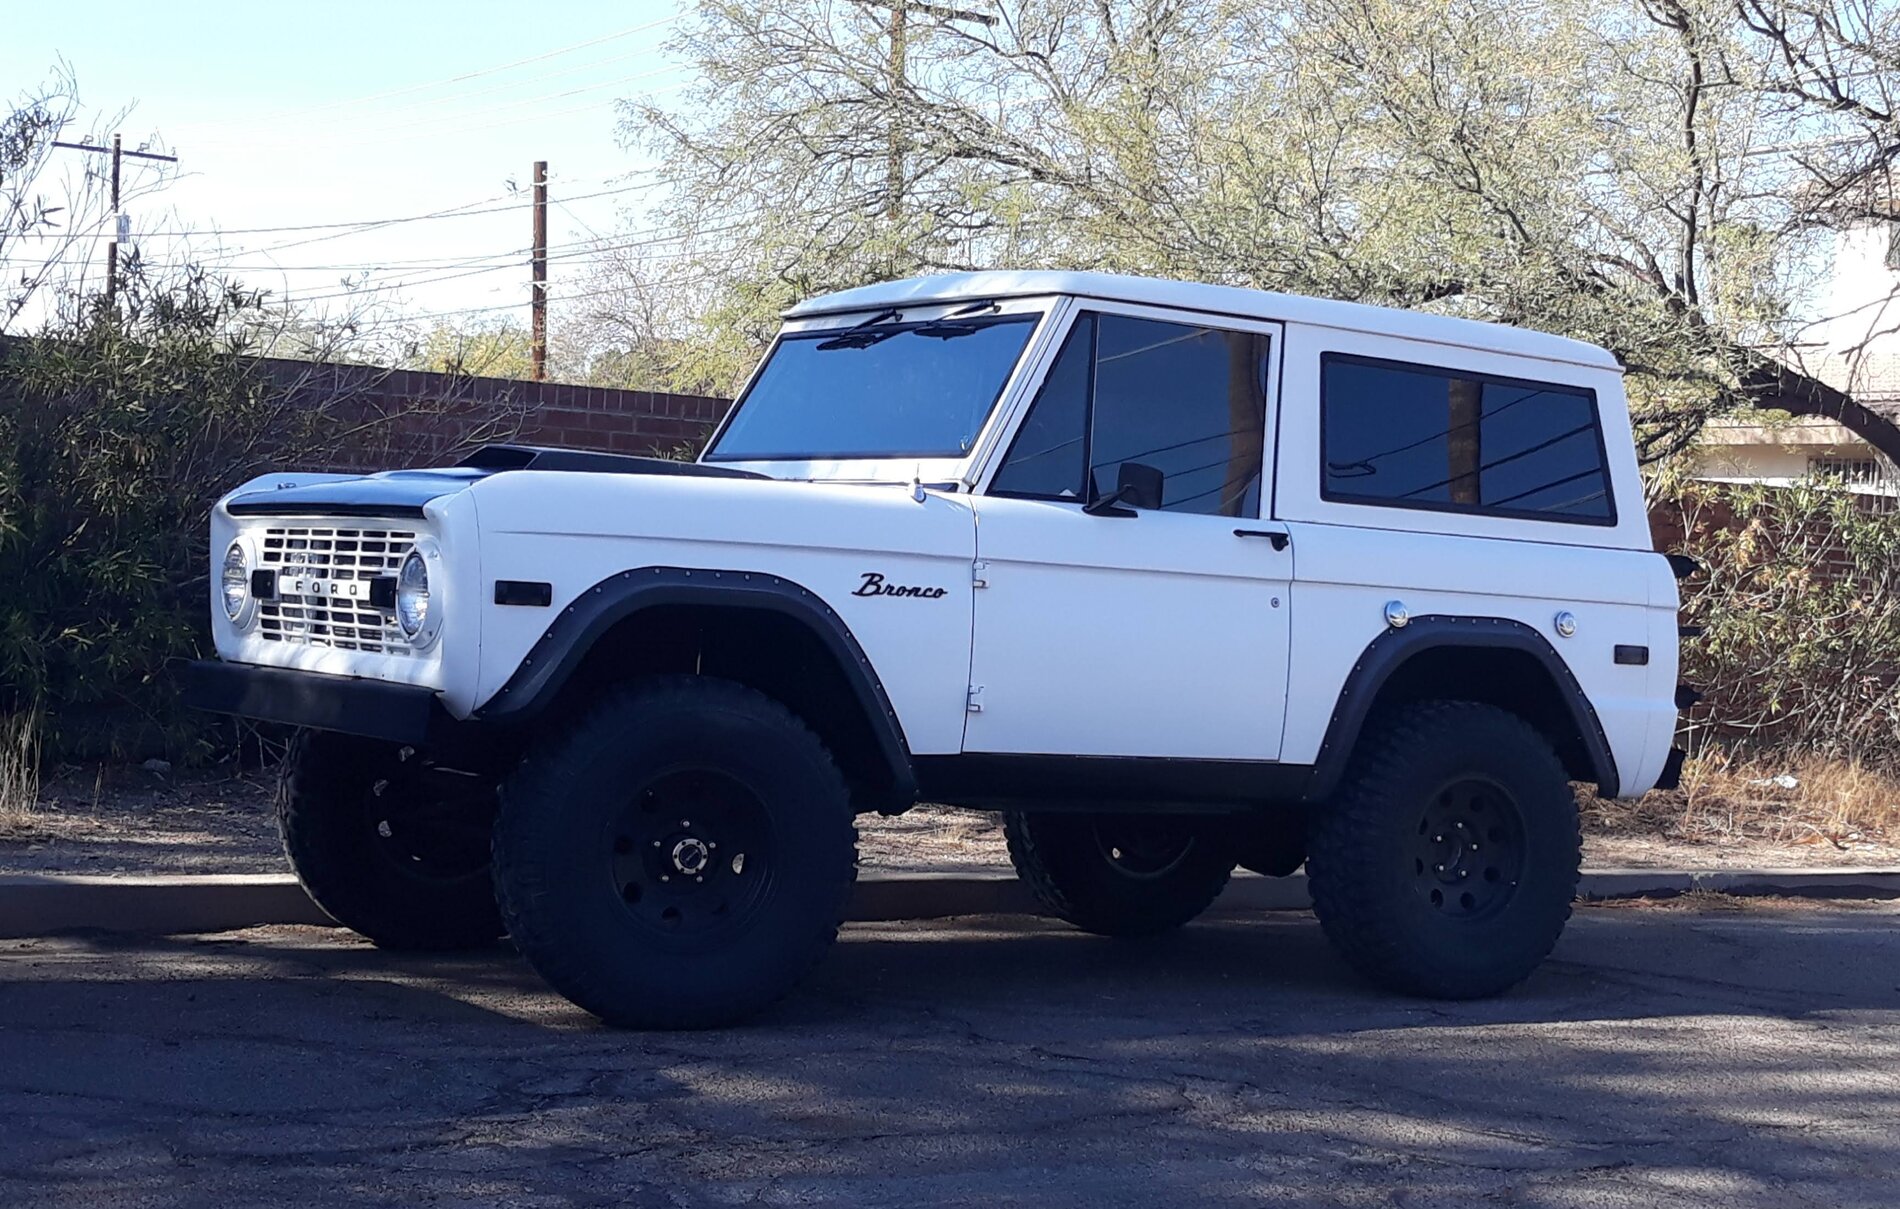 Ford Bronco Who's getting Oxford White? 20201212_152925